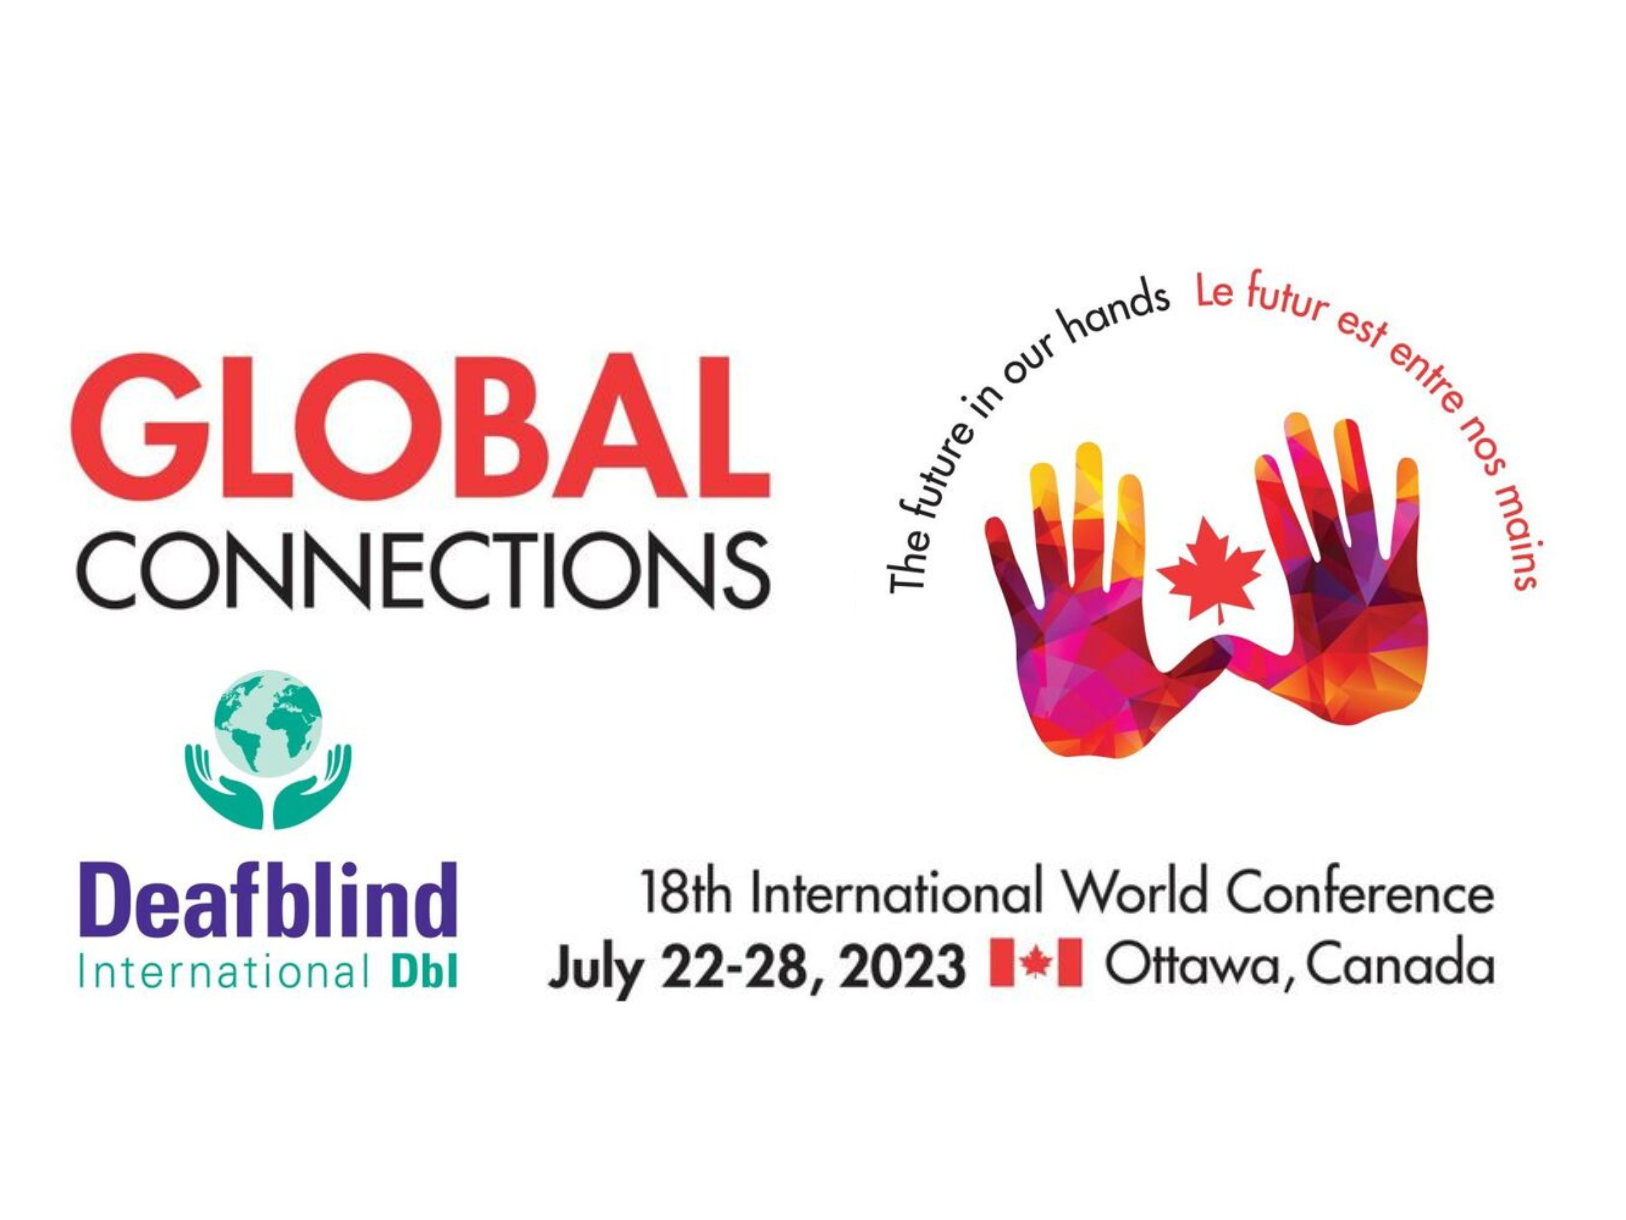 The Deafblind International Logo on the left. In the middle, the text, "Global Connections, 18th International World Conference. July 22-28, 2023. Ottawa, Canada." On the right is an image of two colourful hands with a maple leaf between them. The text, "the future in our hands" is above the hands.